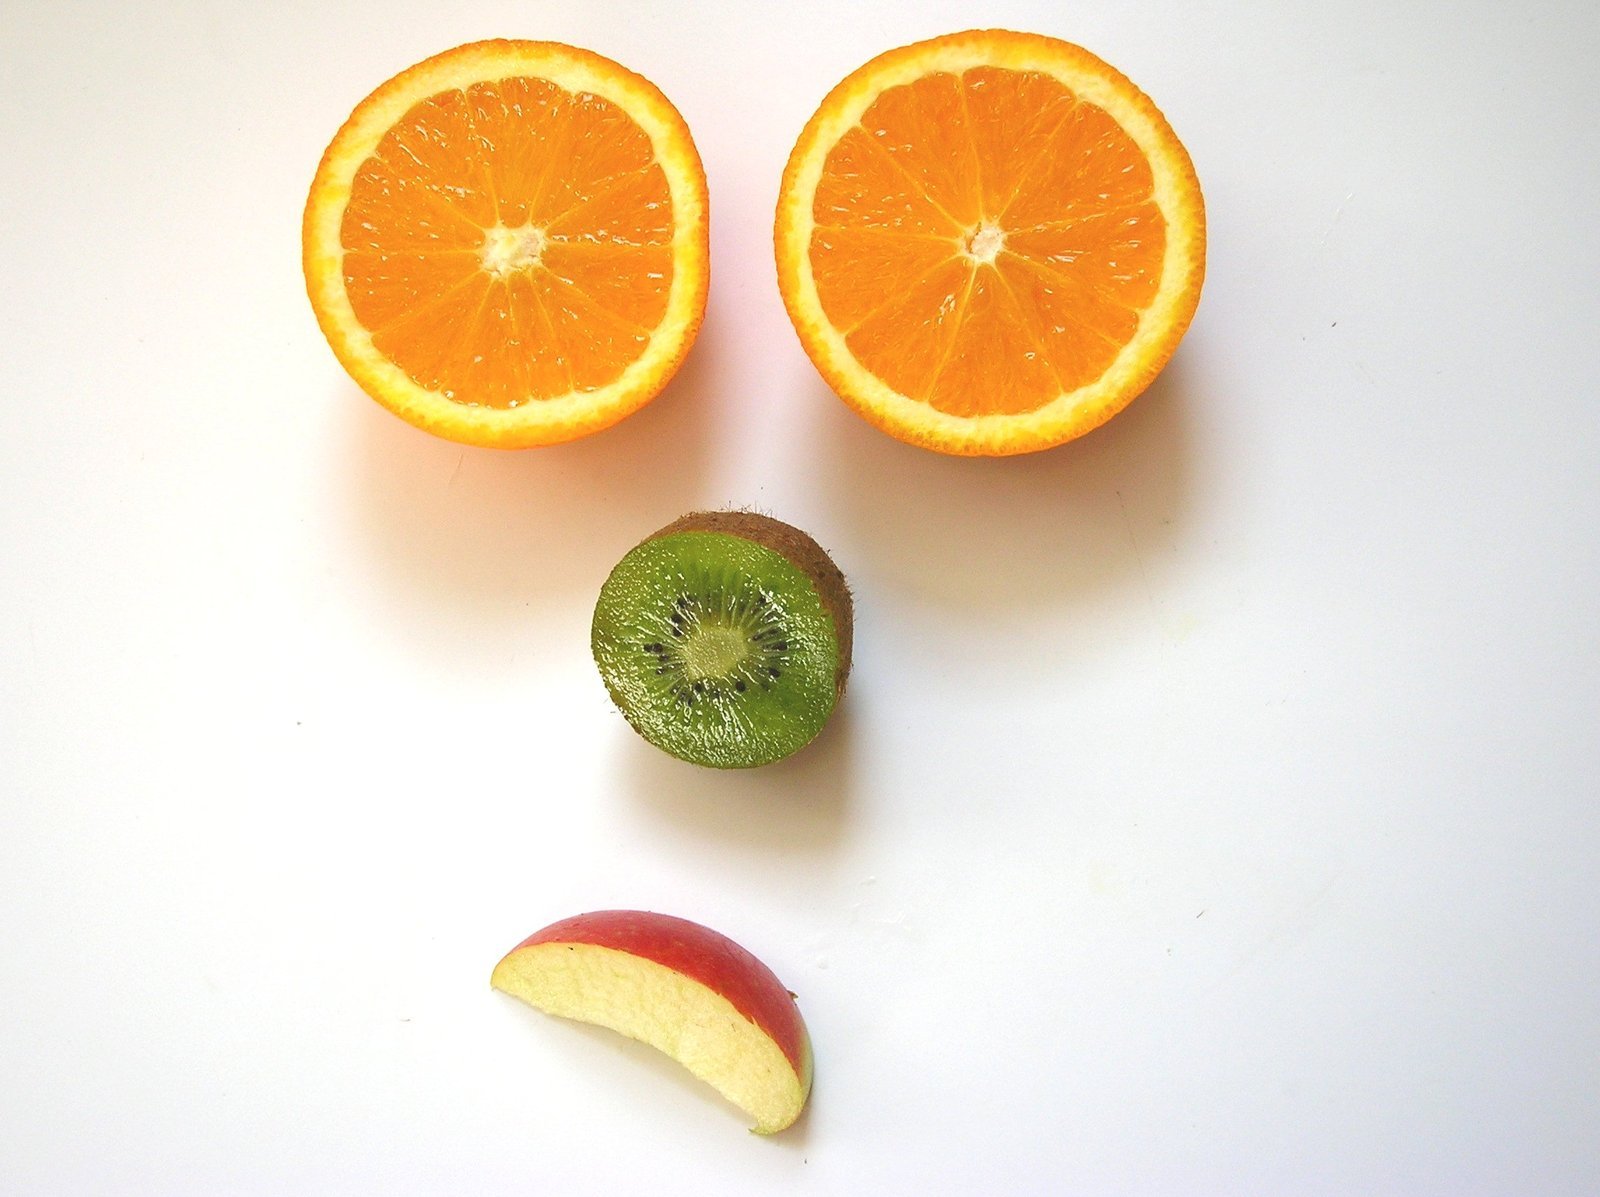 two pieces of fruit with eyes made of each other